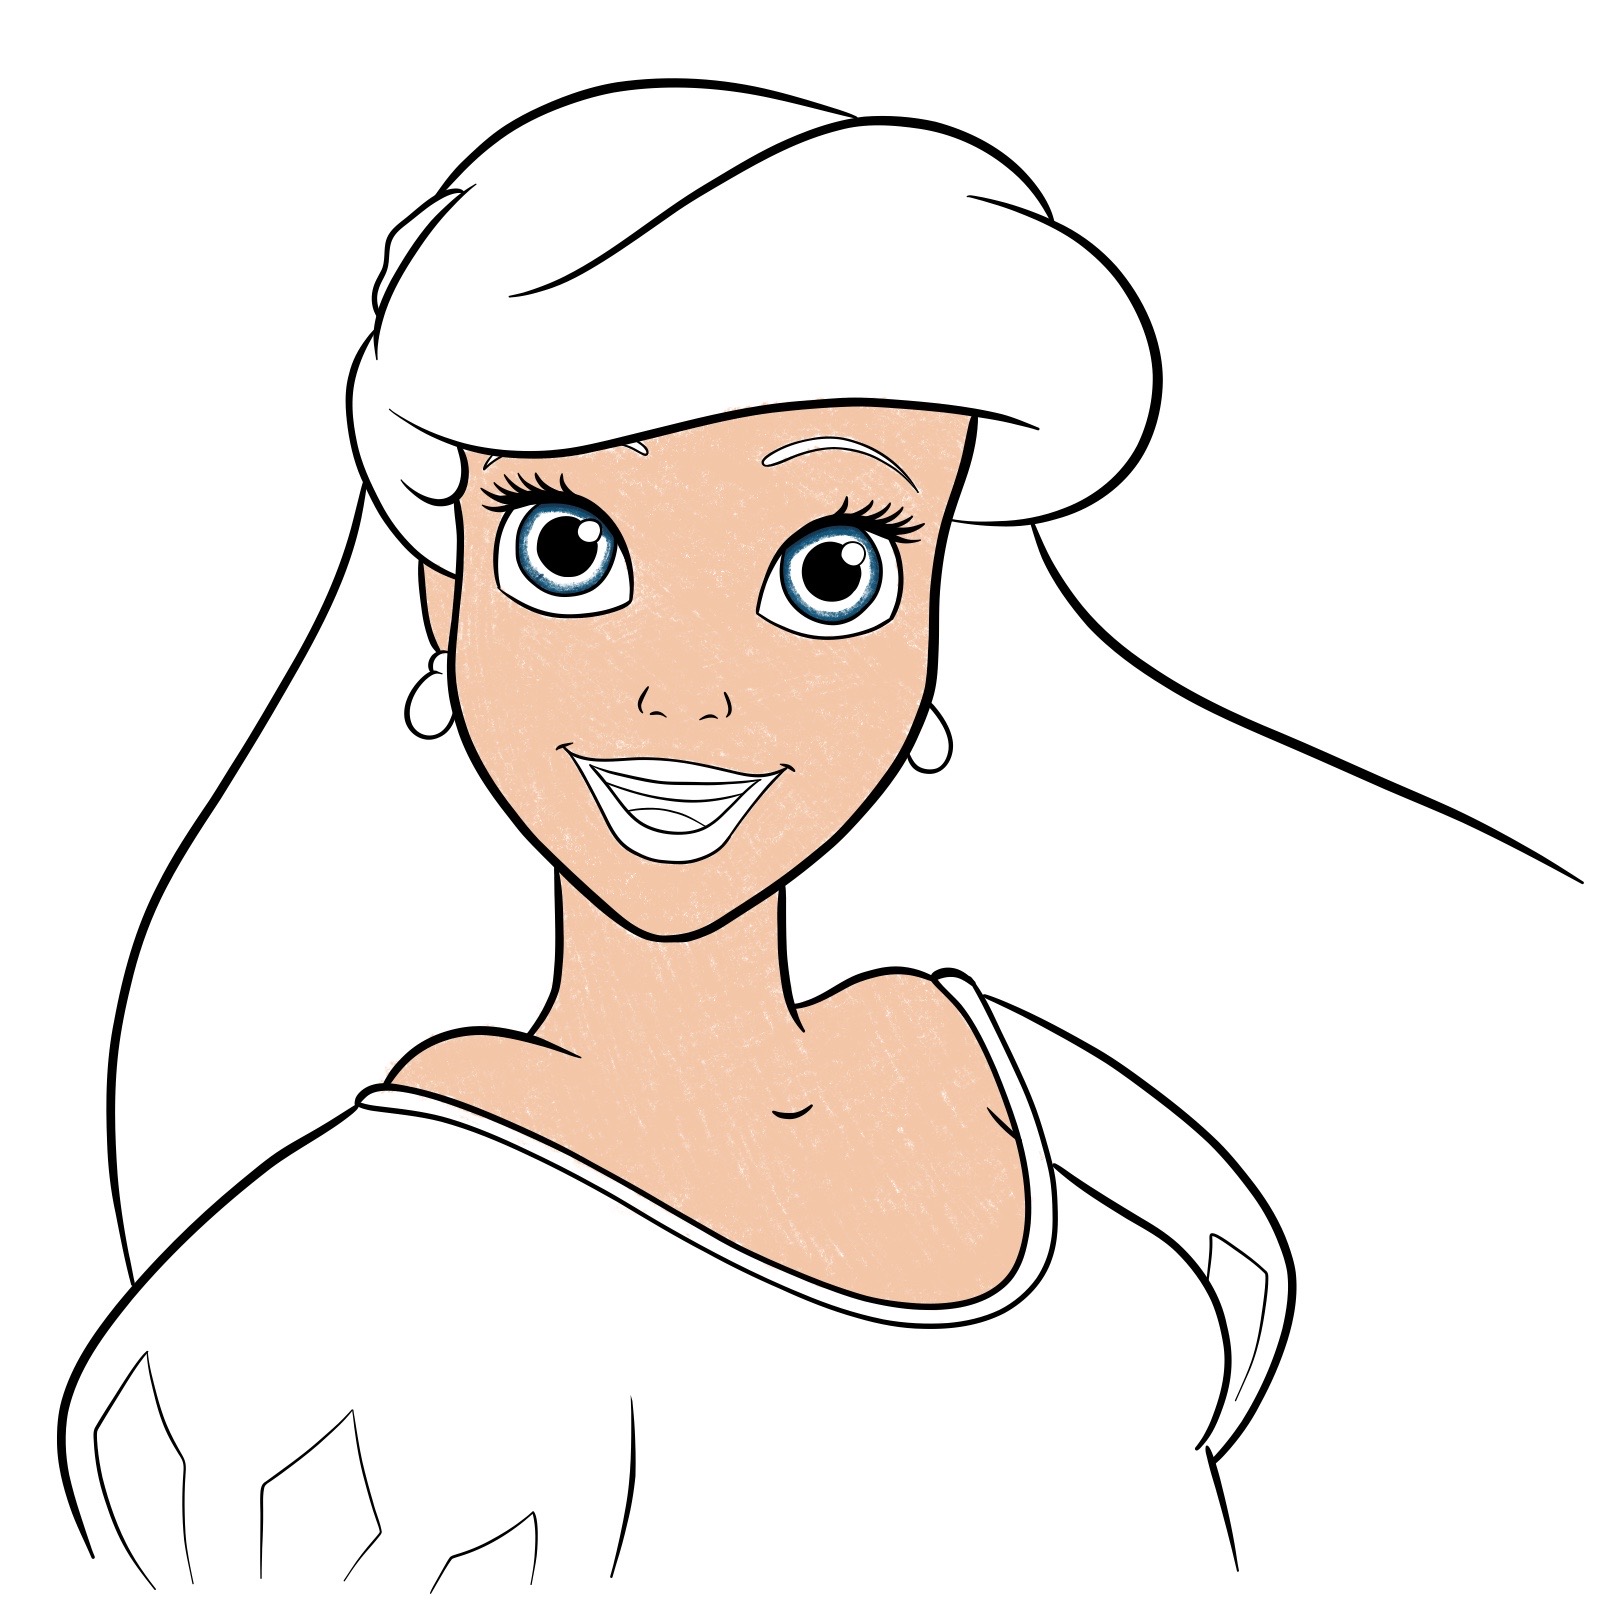 How to draw Ariel's face - The Little Mermaid - step 30